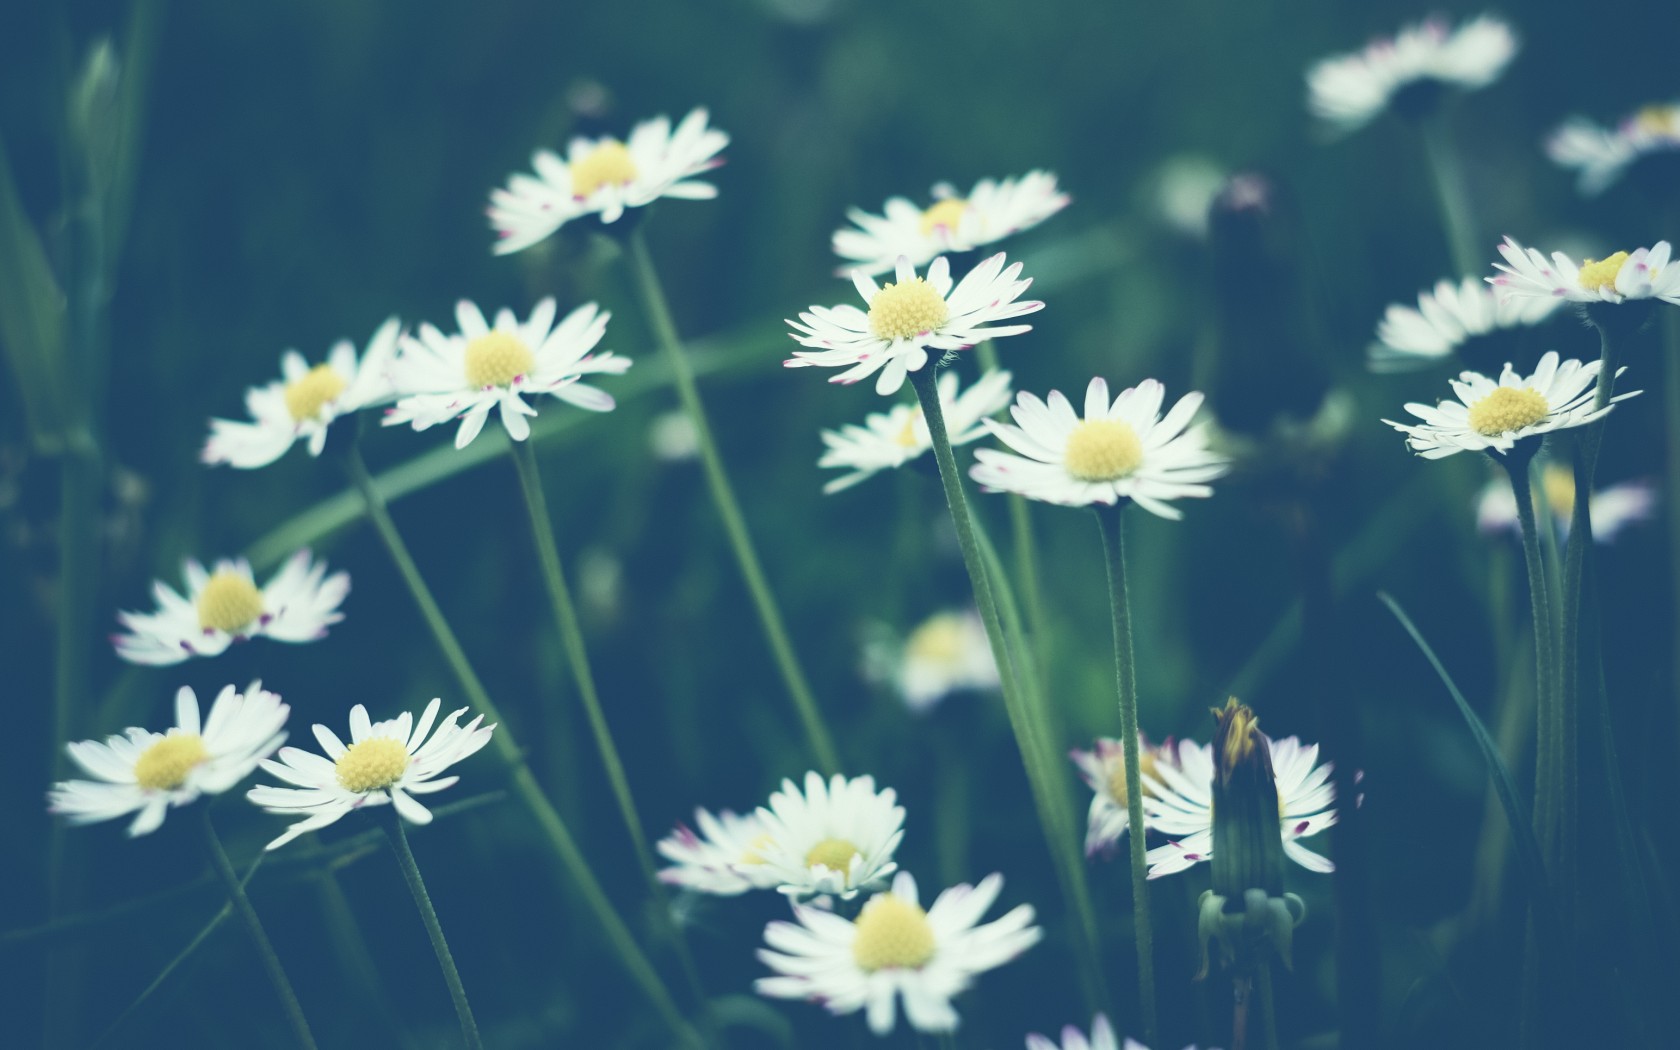 daisy flower pictures and wallpapers Download